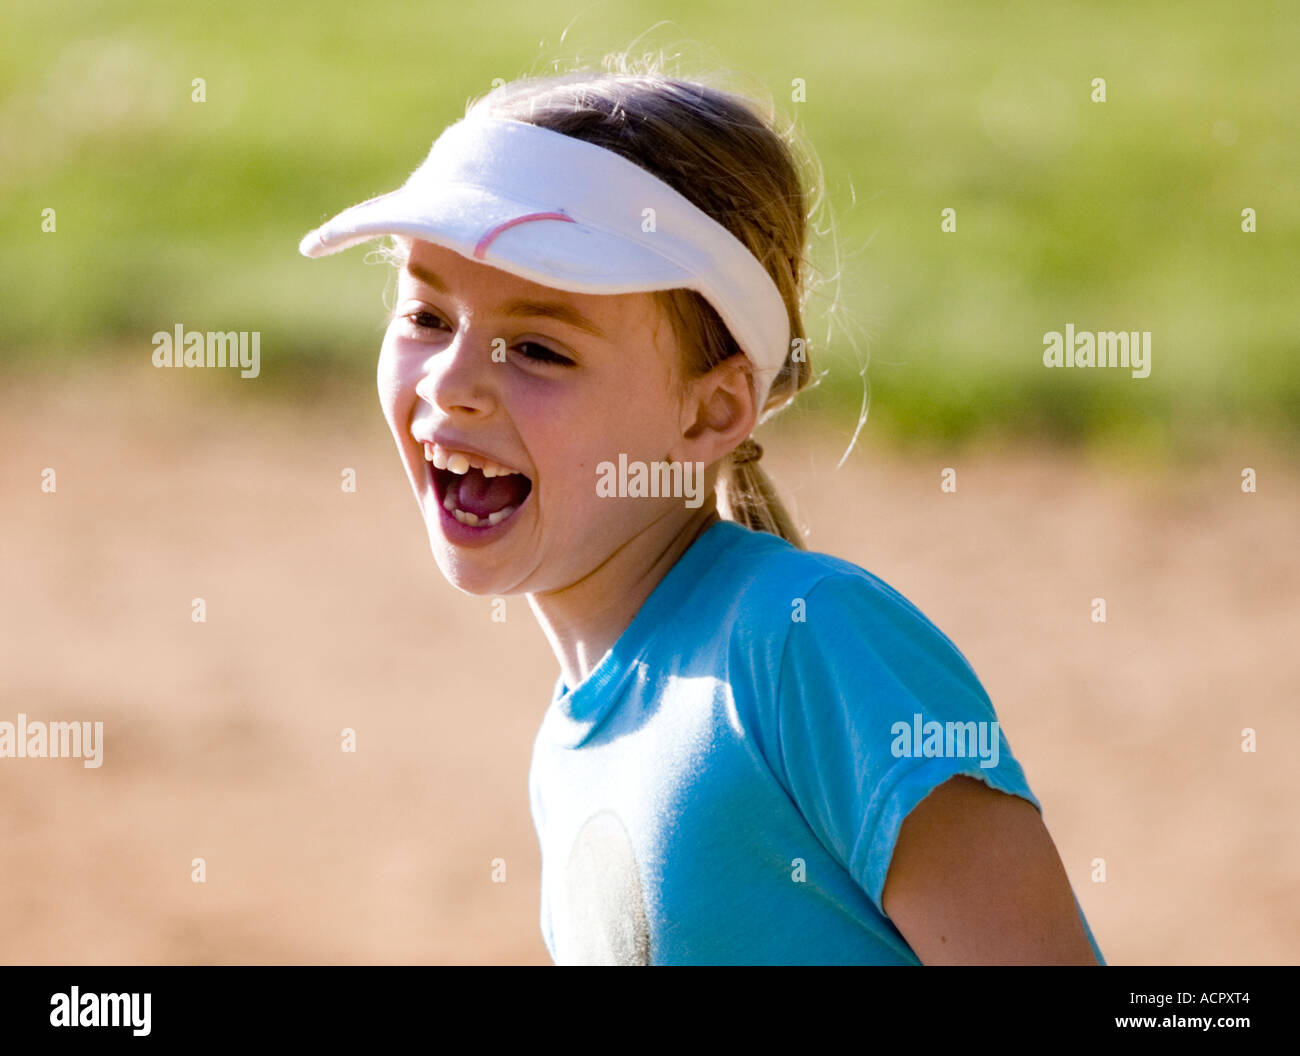 Child laughing with missing teeth Stock Photo